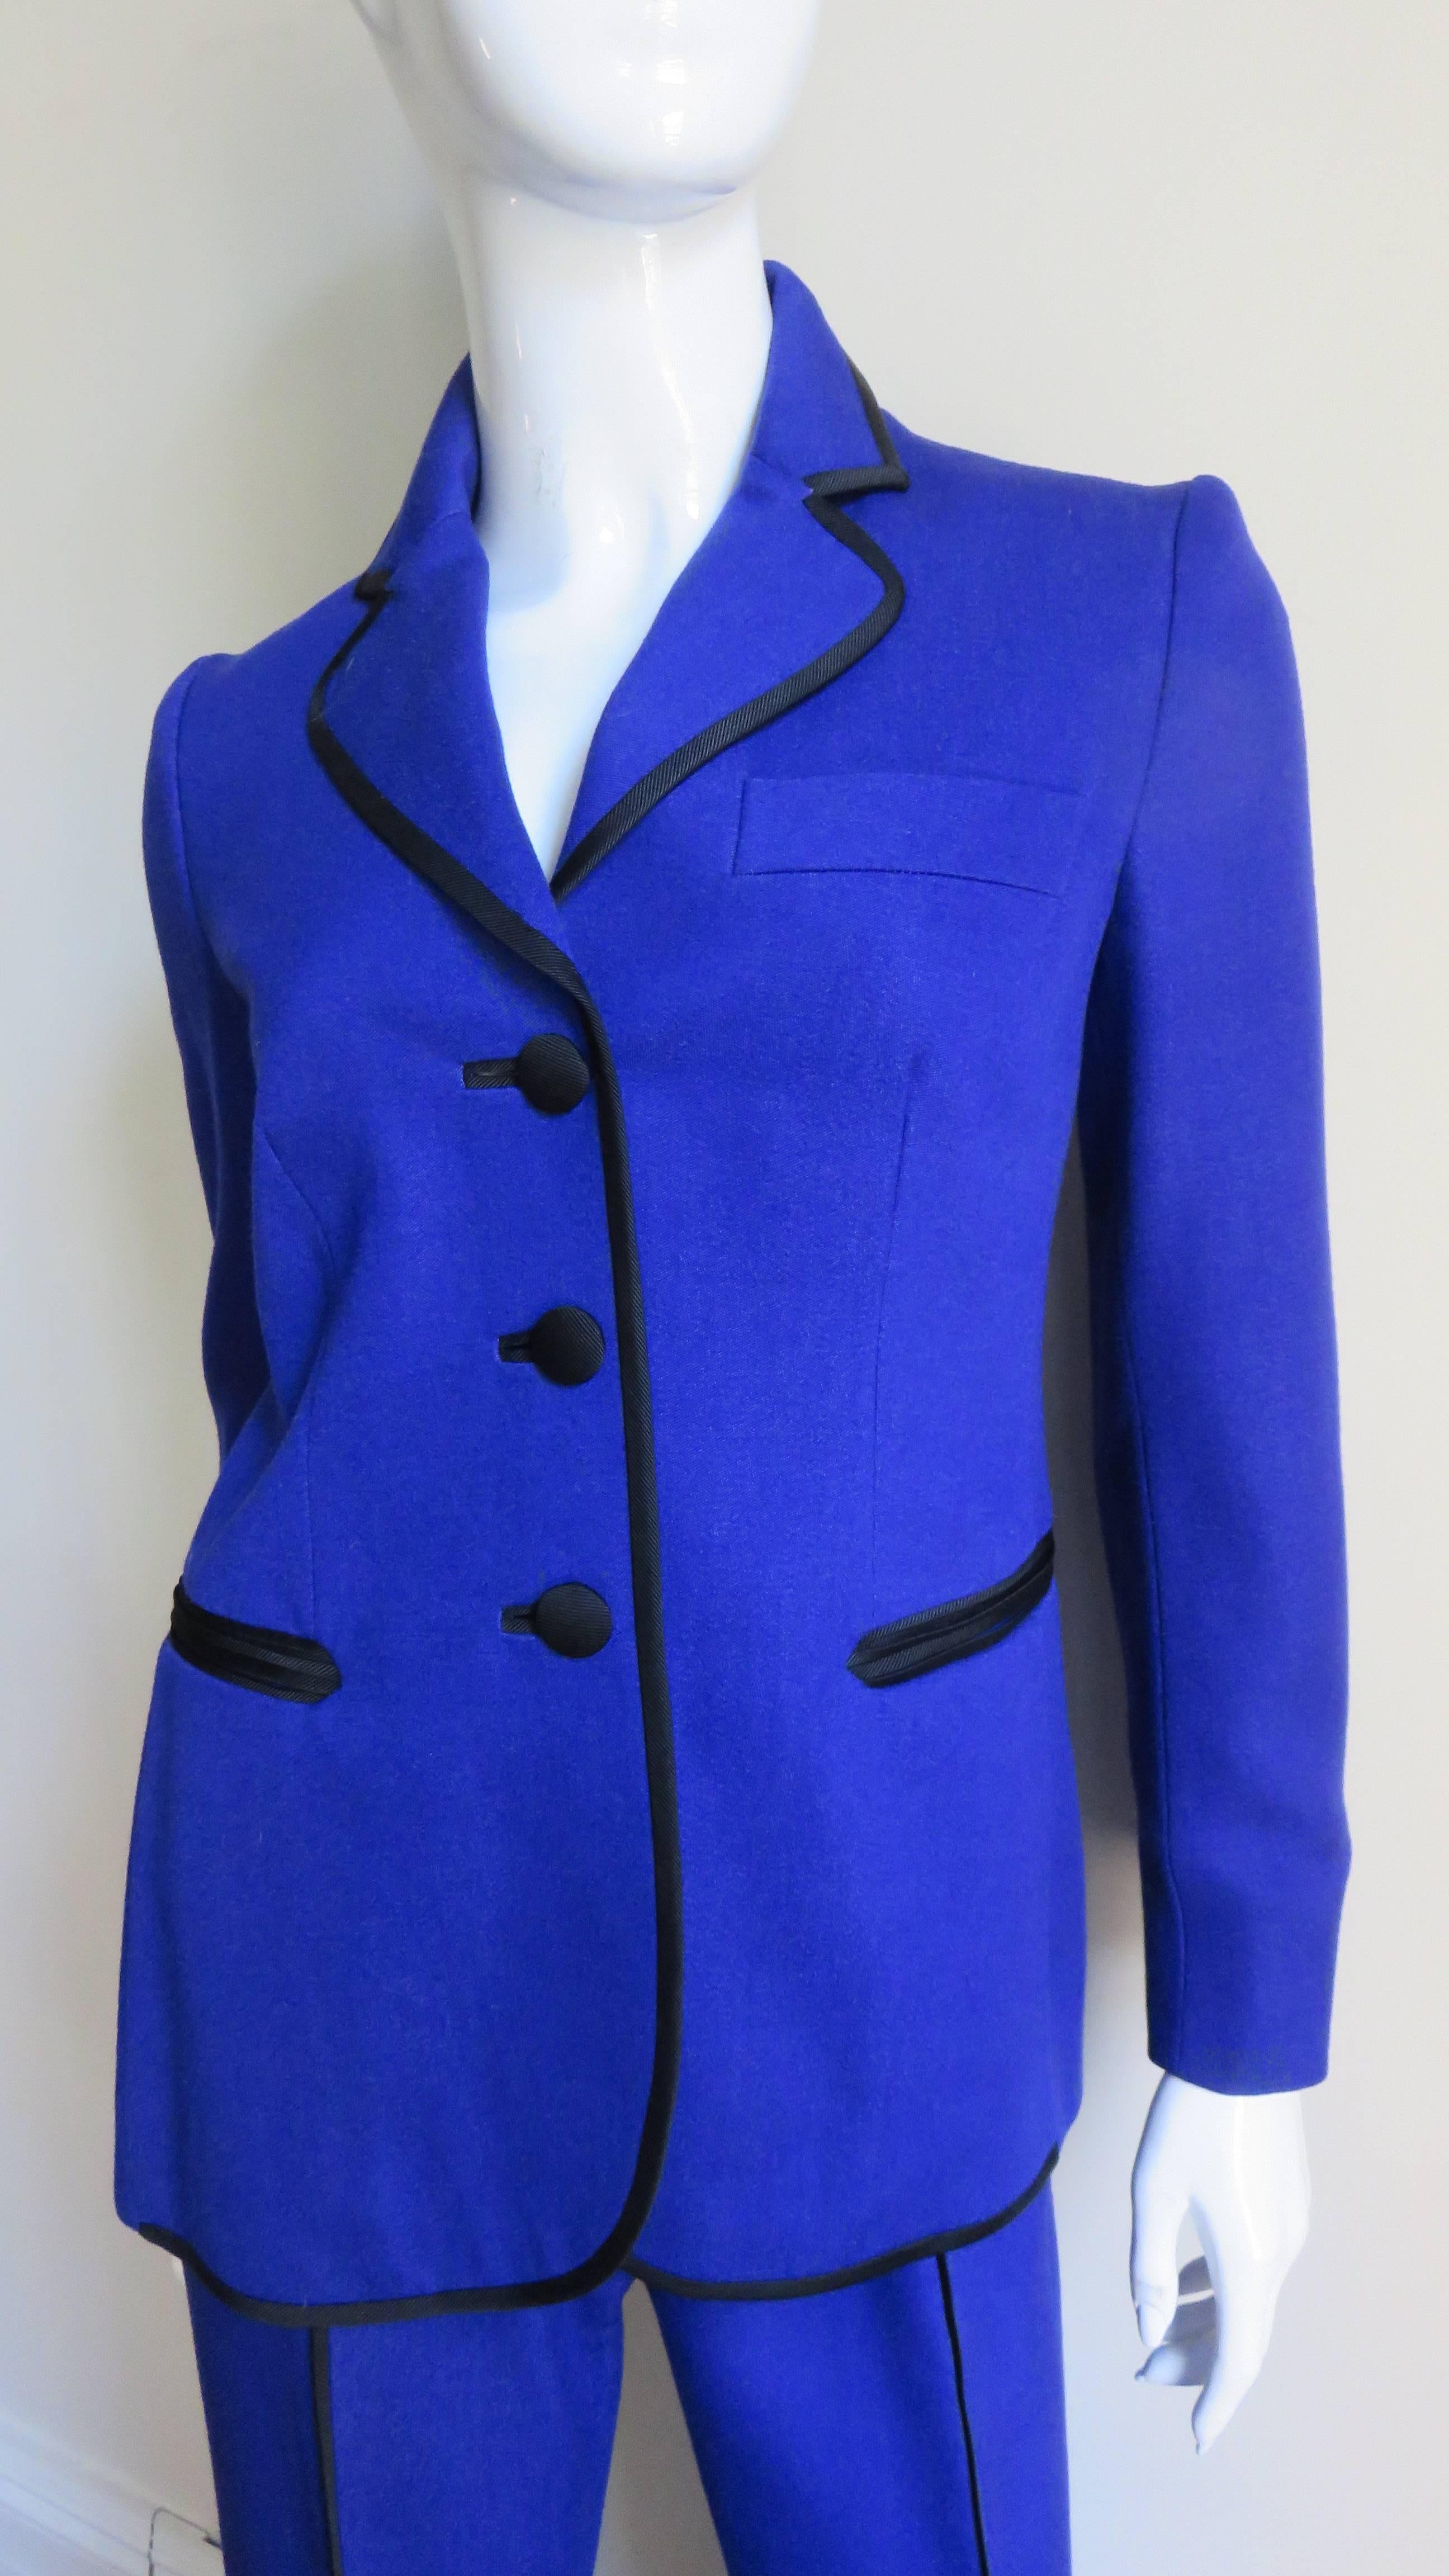 A fabulous fun pantsuit by Moschino in bright blue wool.  It consists of a boxy cut jacket and pants.  The jacket lapels, hem, welt pockets, center front and back pant legs and waistband are all trimmed in black braid.  The jacket has 3 front black